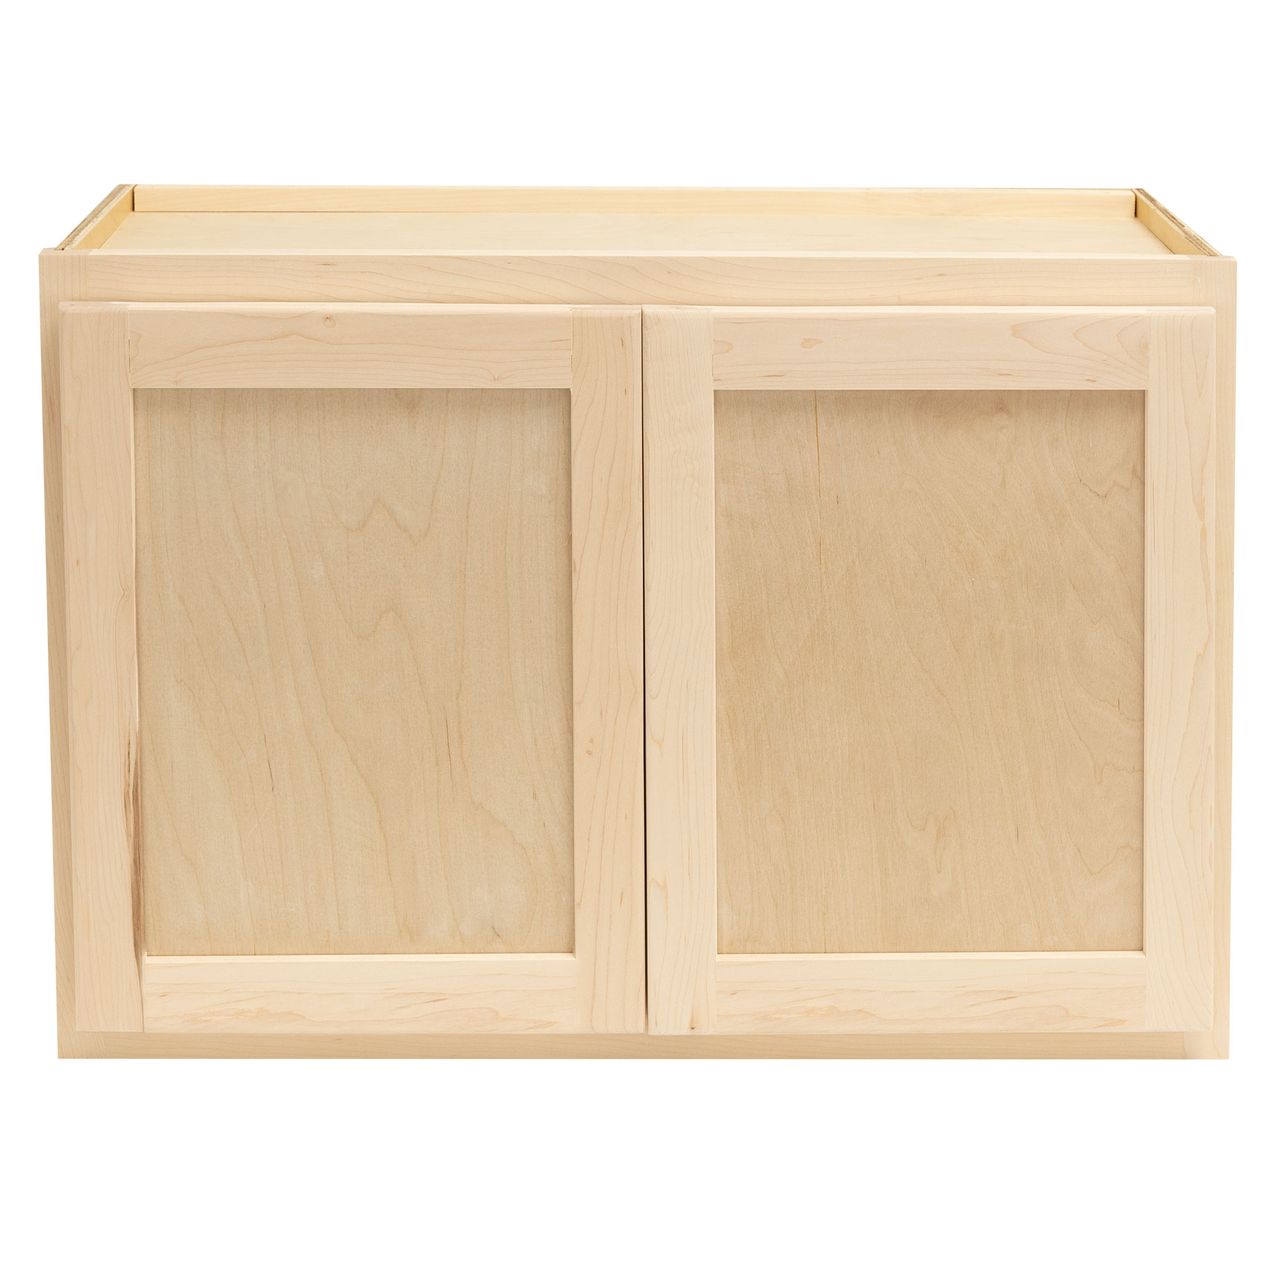 Quicklock RTA (Ready-to-Assemble) Raw Maple Microwave Wall Cabinet- 30"W x (12", 18", 24"H)